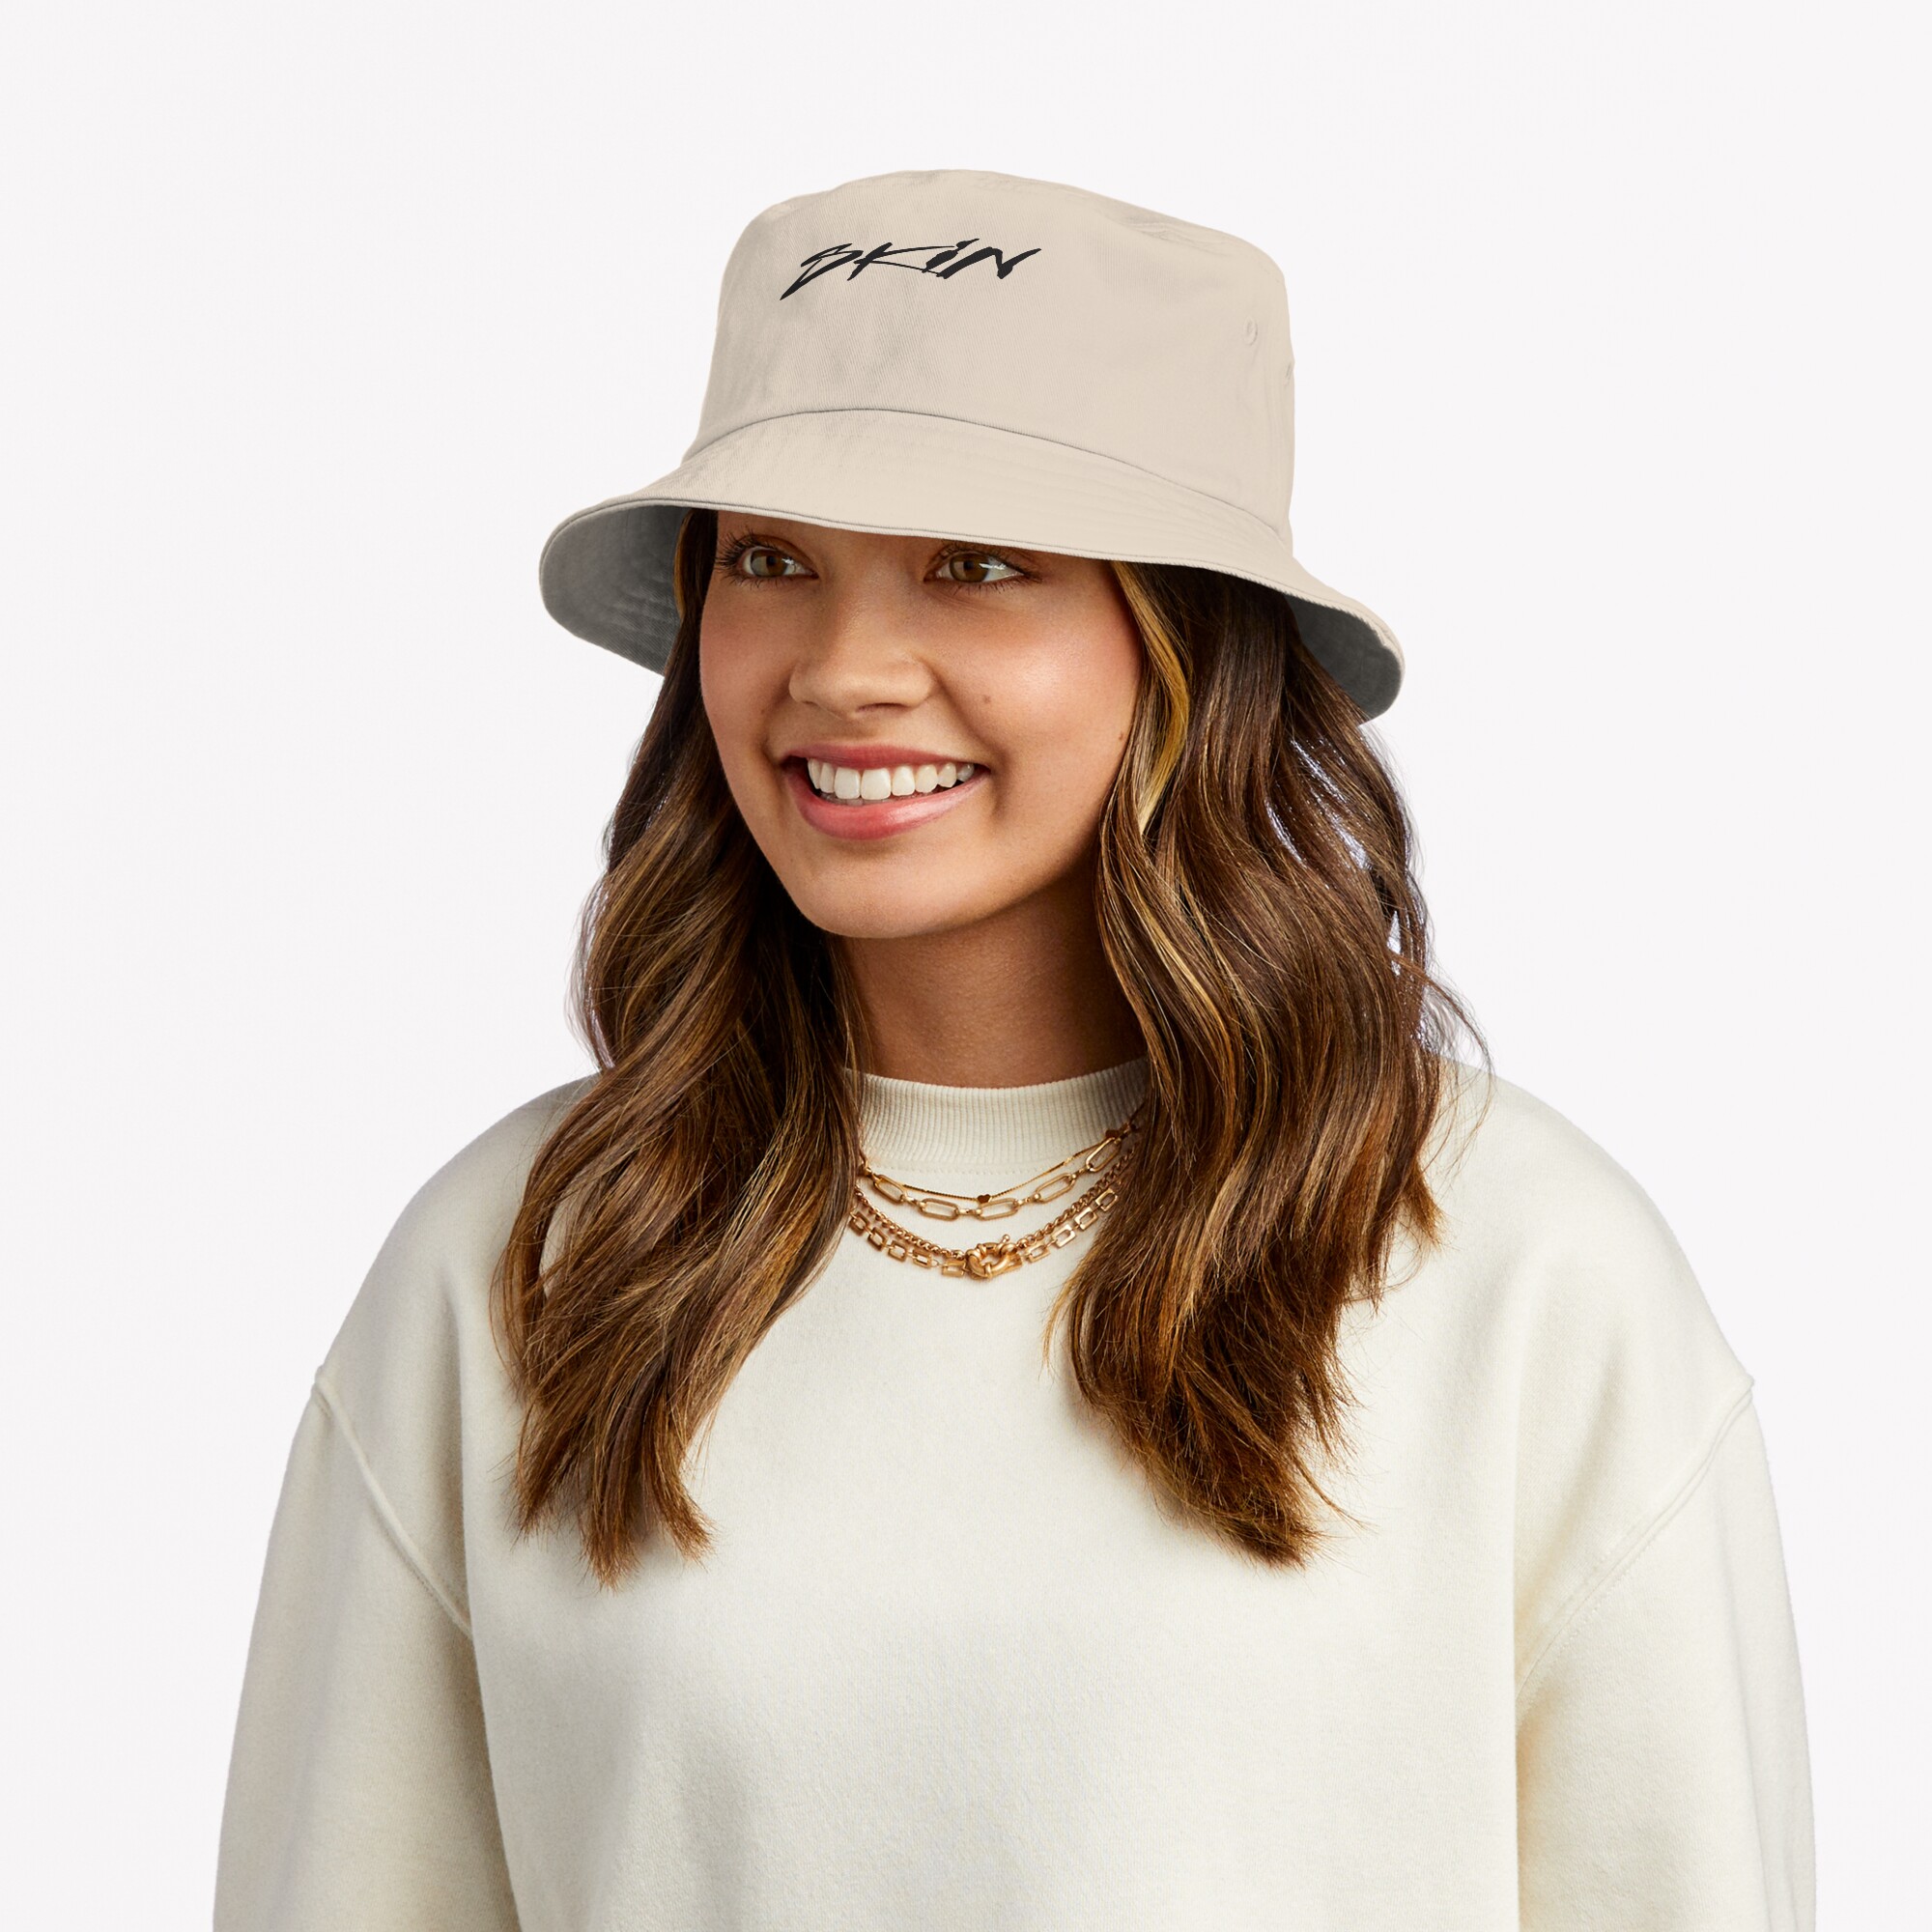 ssrcobucket hatwomense5d6c5f62bbf65eefrontsquare2000x2000 bgf8f8f8 6 - Sam And Colby Shop